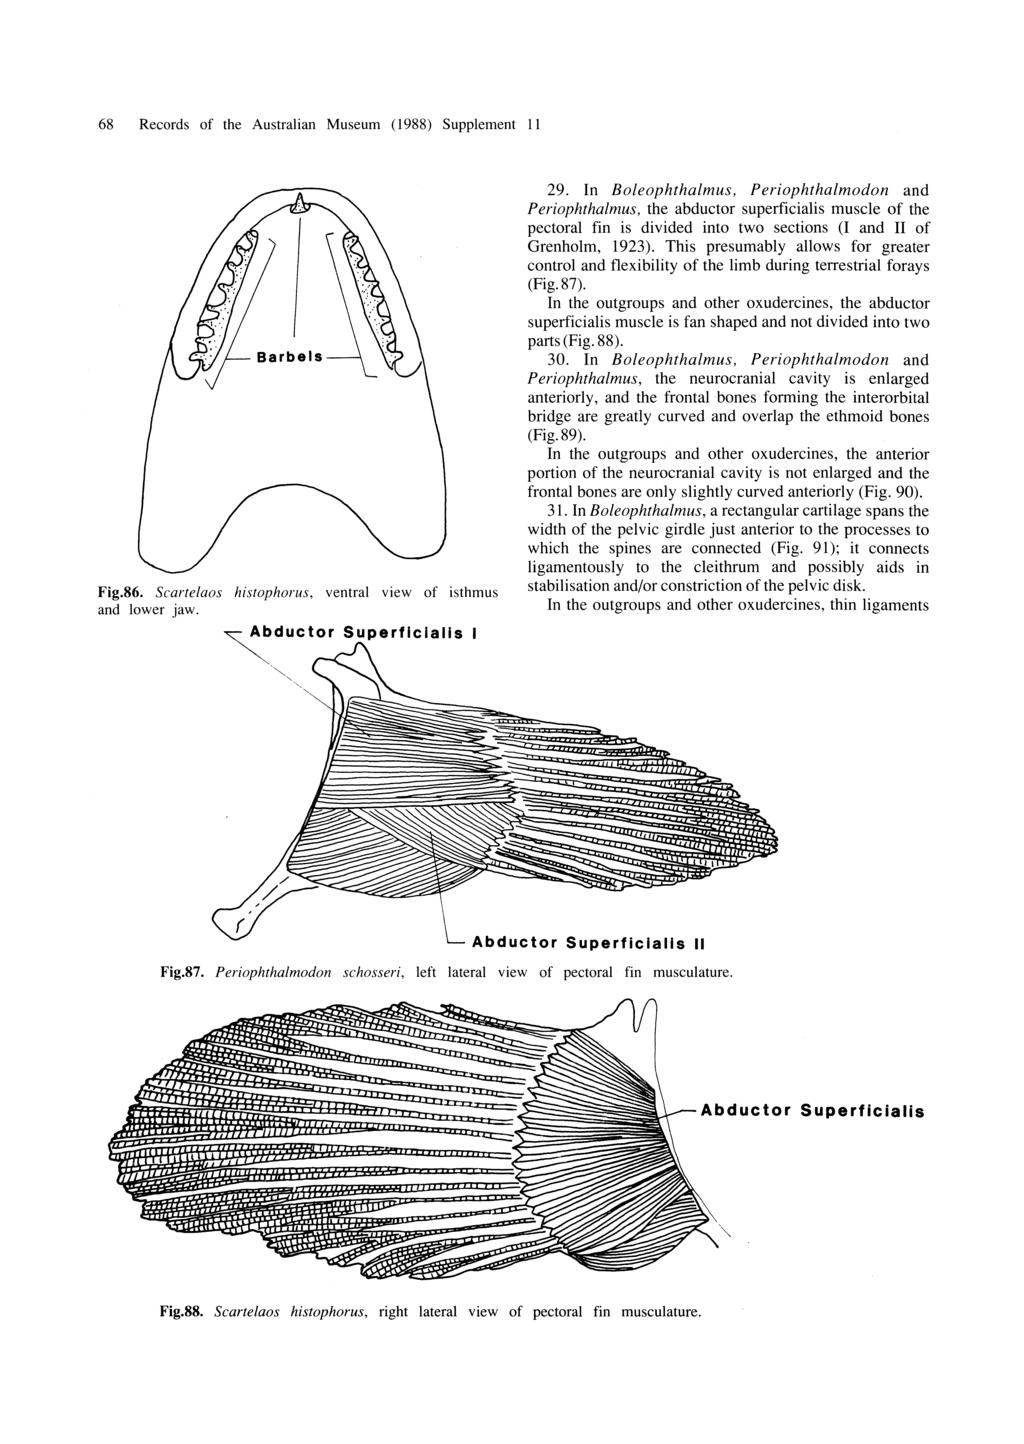 68 Records of the Australian Museum (1988) Supplement 11 Fig.86. Scartelaos histophorus, ventral view of isthmus and lower jaw. Superflclalis 29.